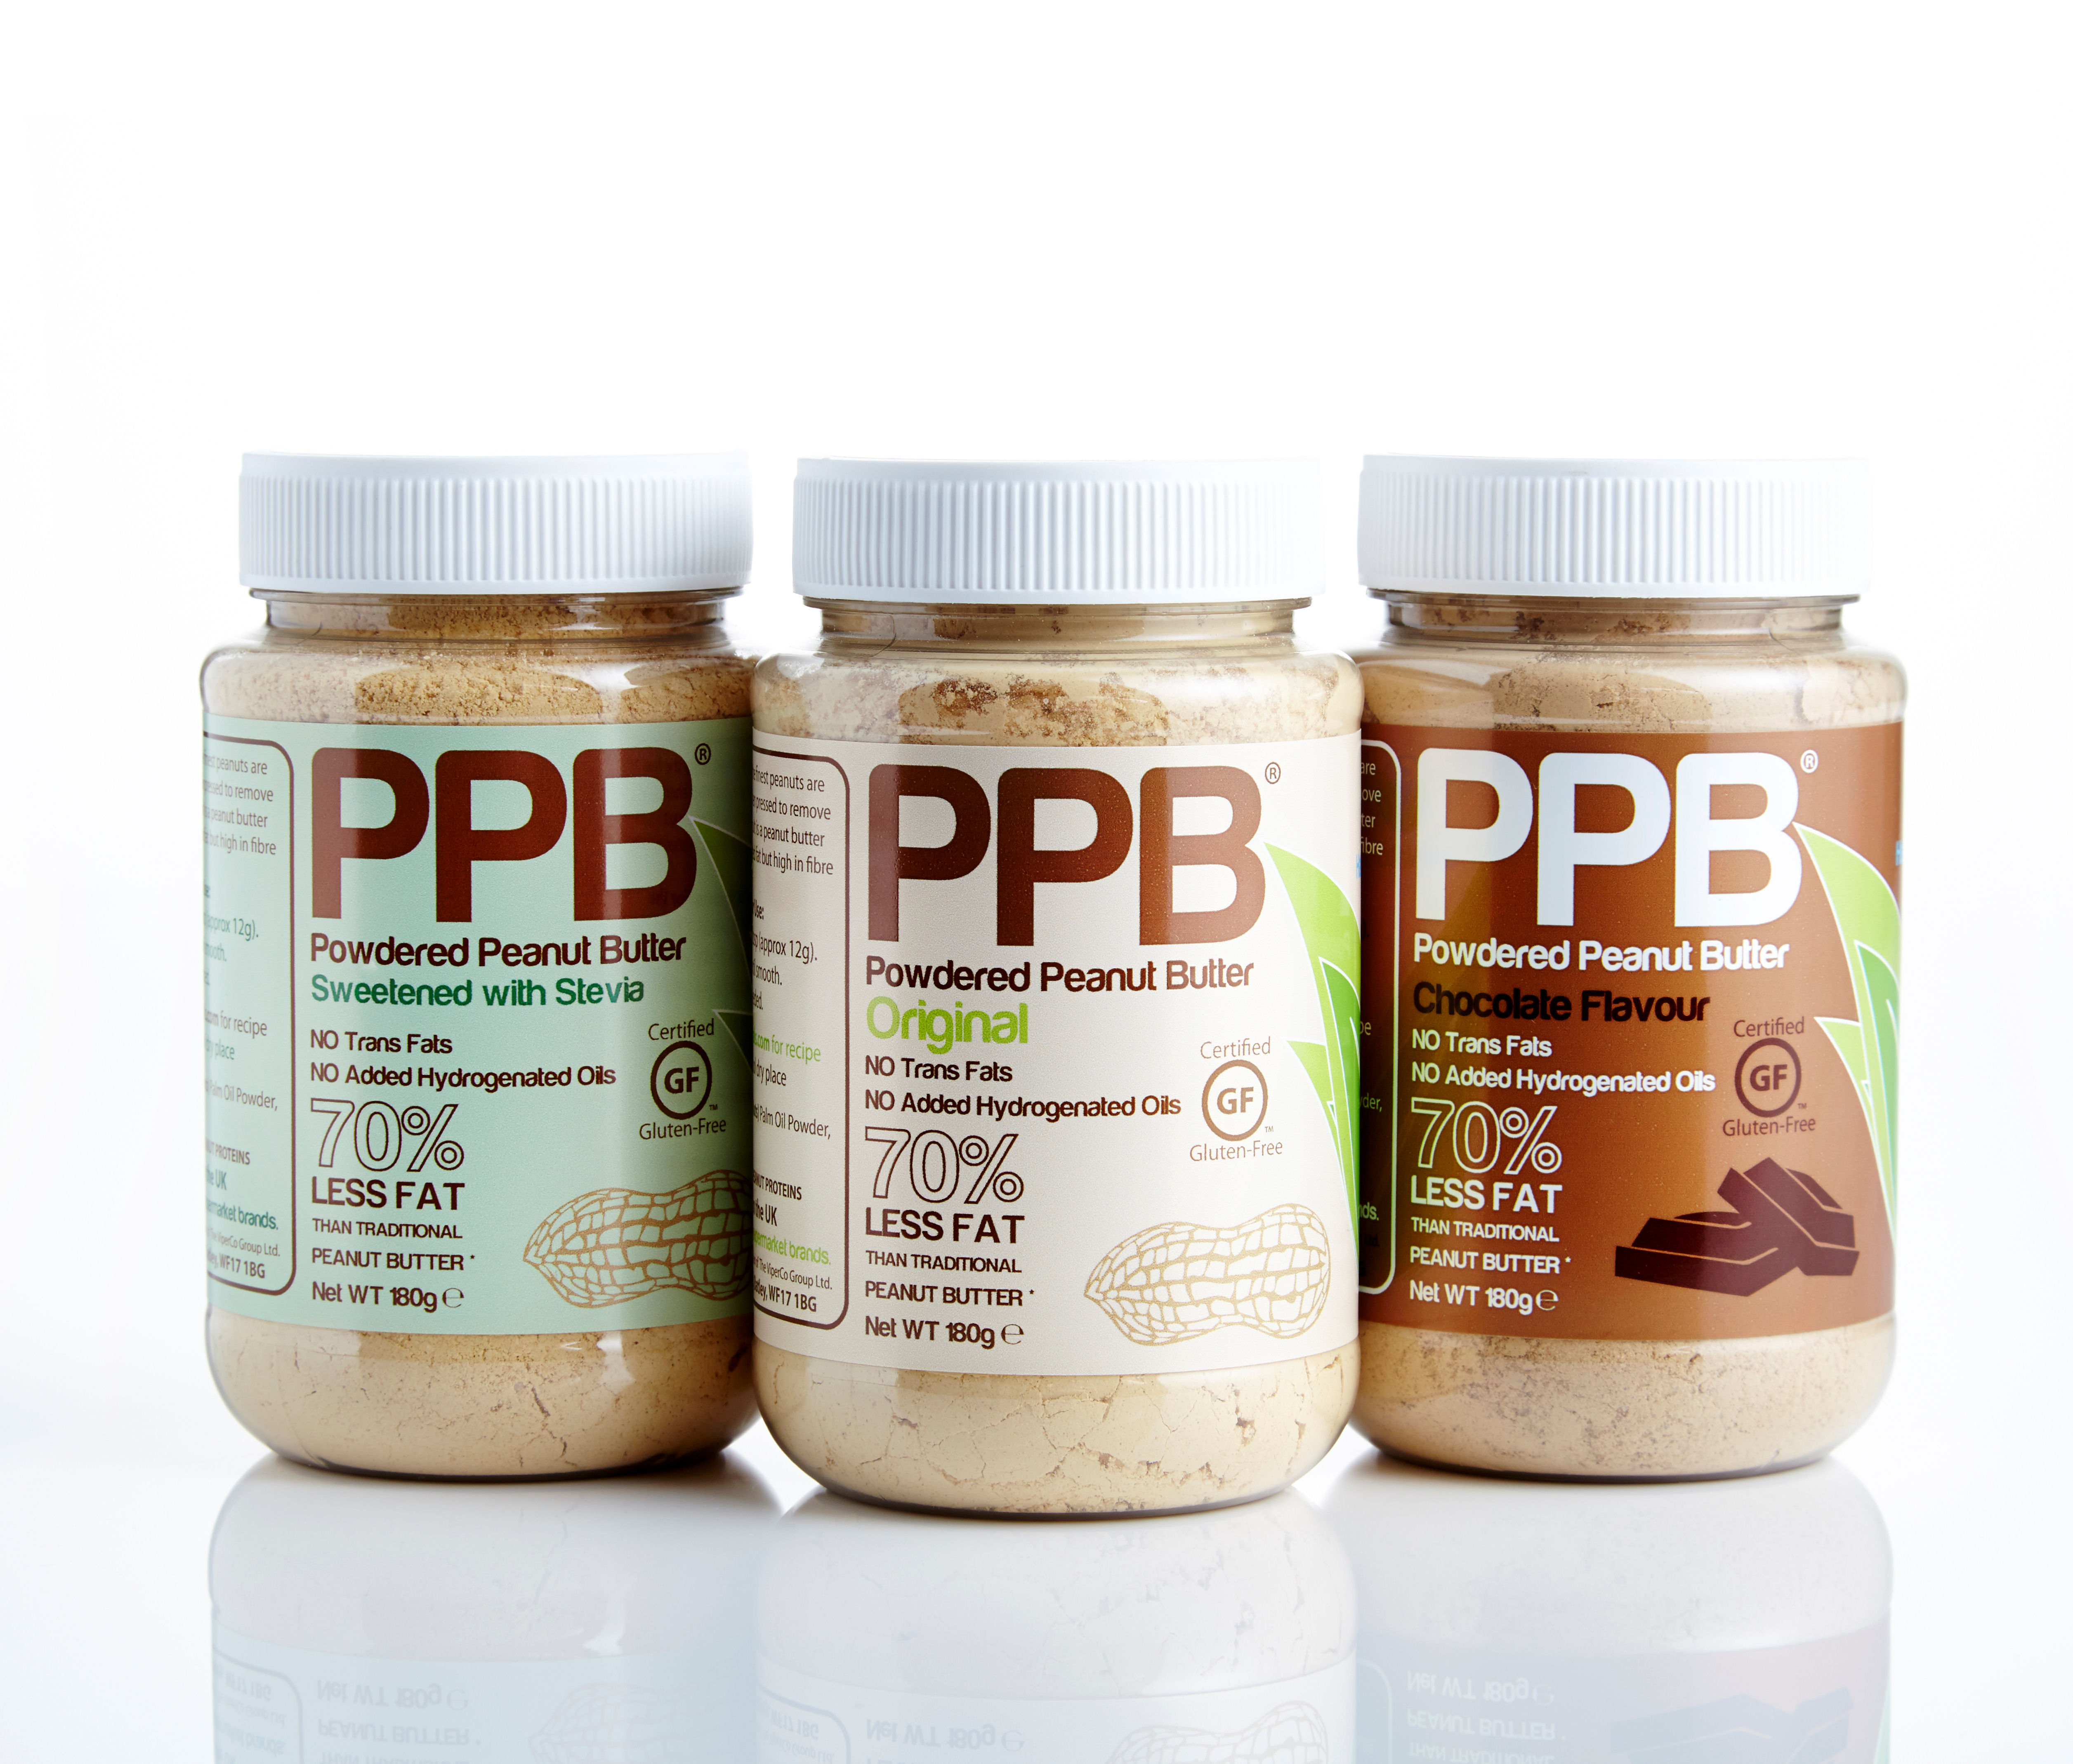 Whats the Deal with Powdered Peanut Butter? | Kitchn